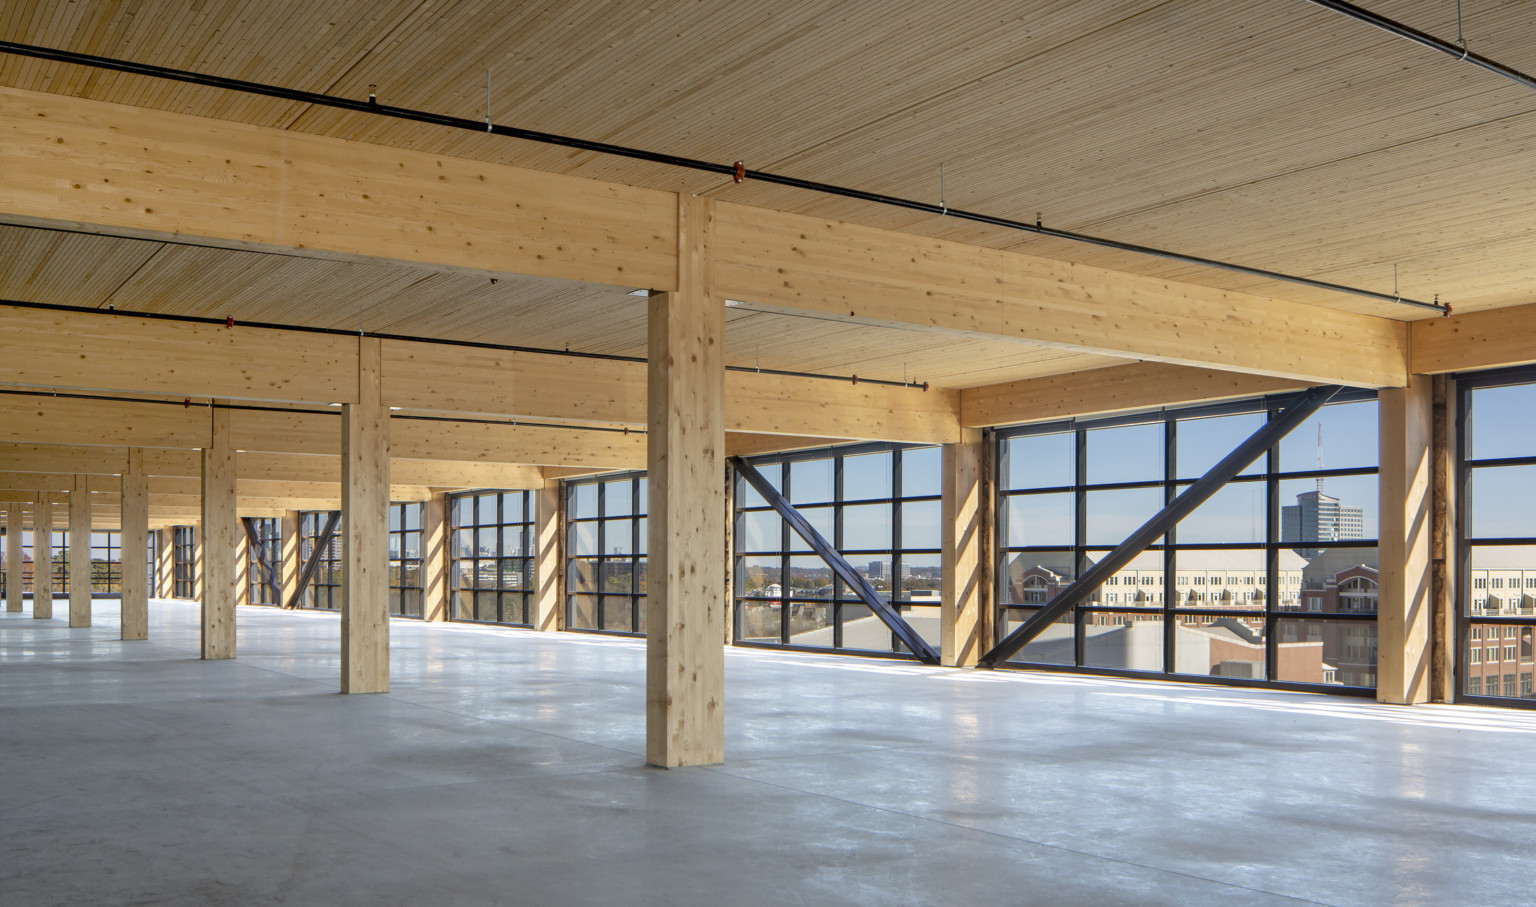 Interior with wood columns, ceiling and beams lined with floor to ceiling windows with black seams and exposed steel beams